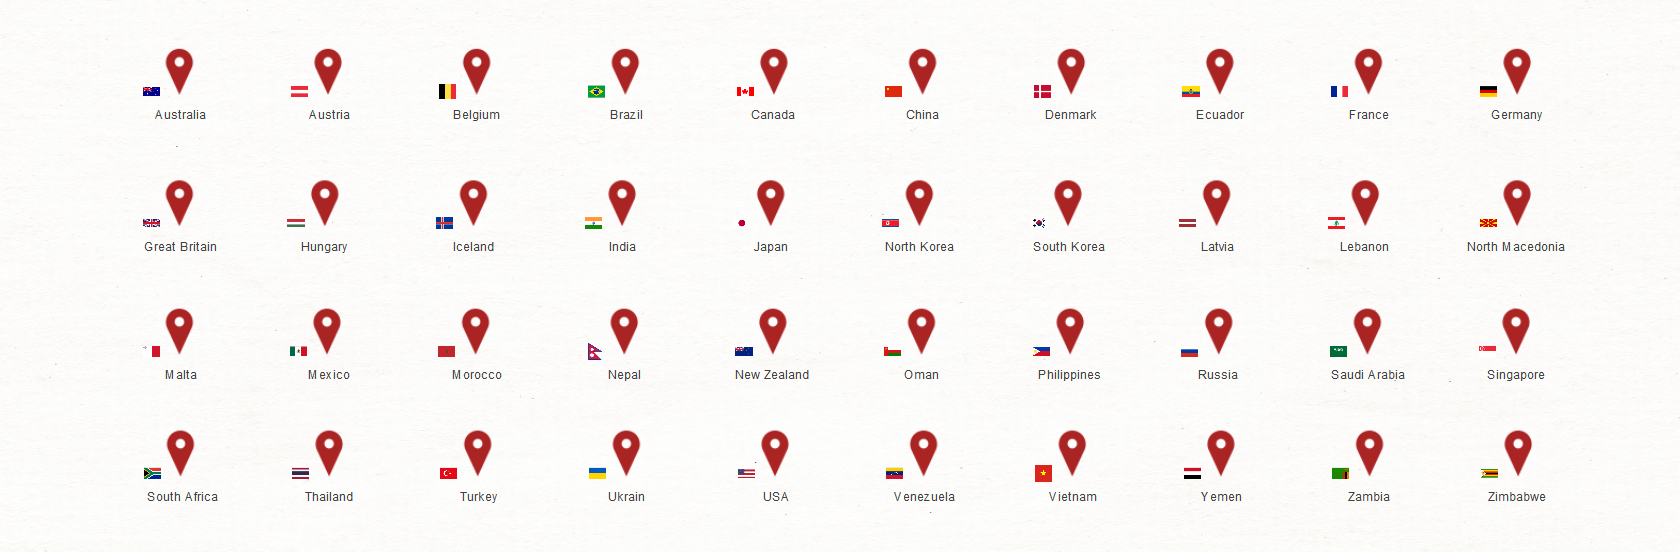 Maltego Location Entity overlay shows country flags